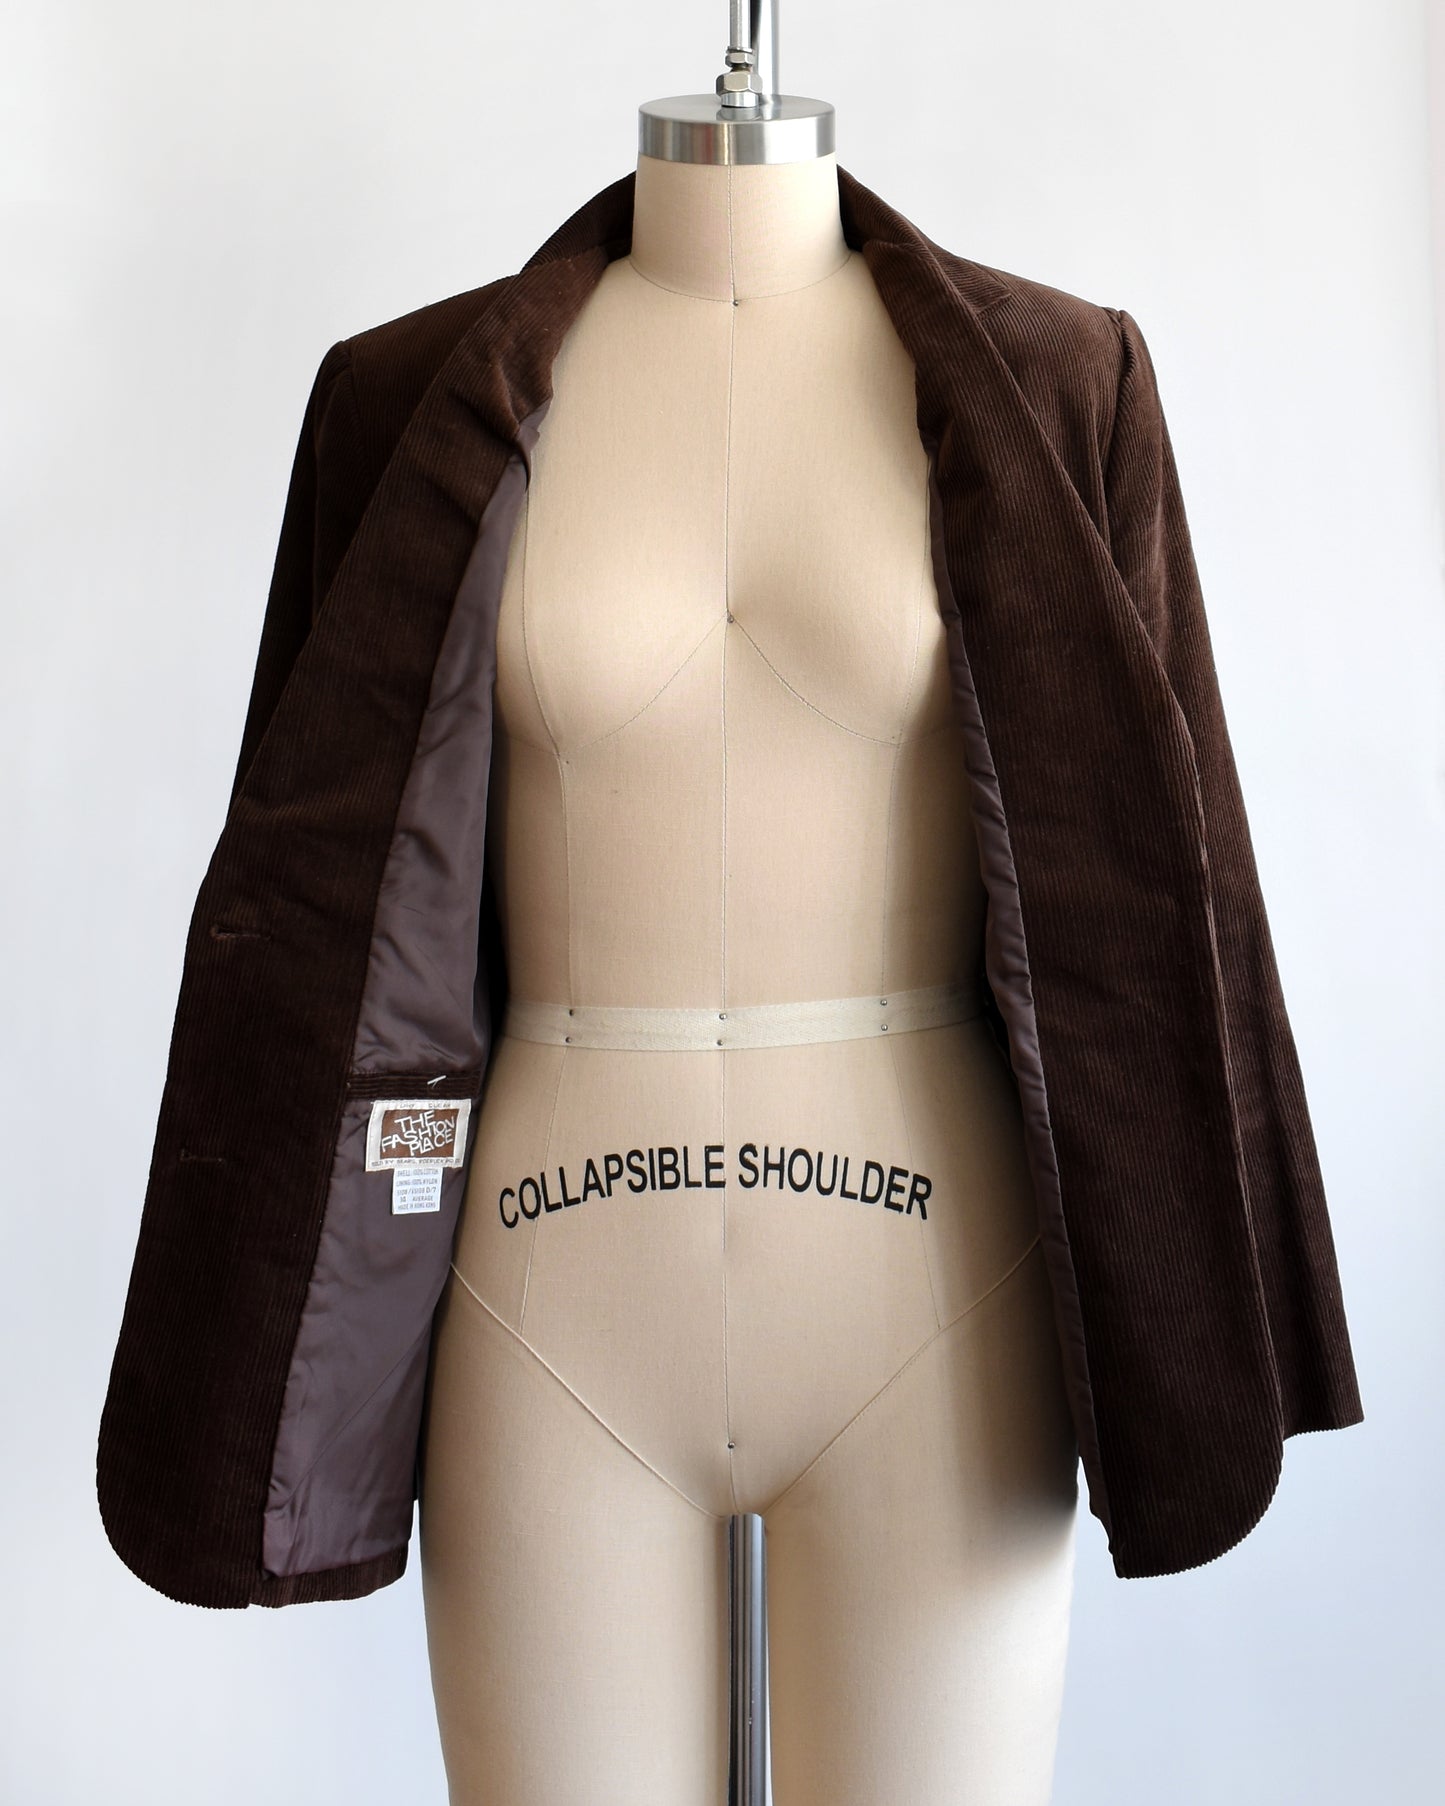 A vintage 1970s brown corduroy blazer that's open showing the brown lining